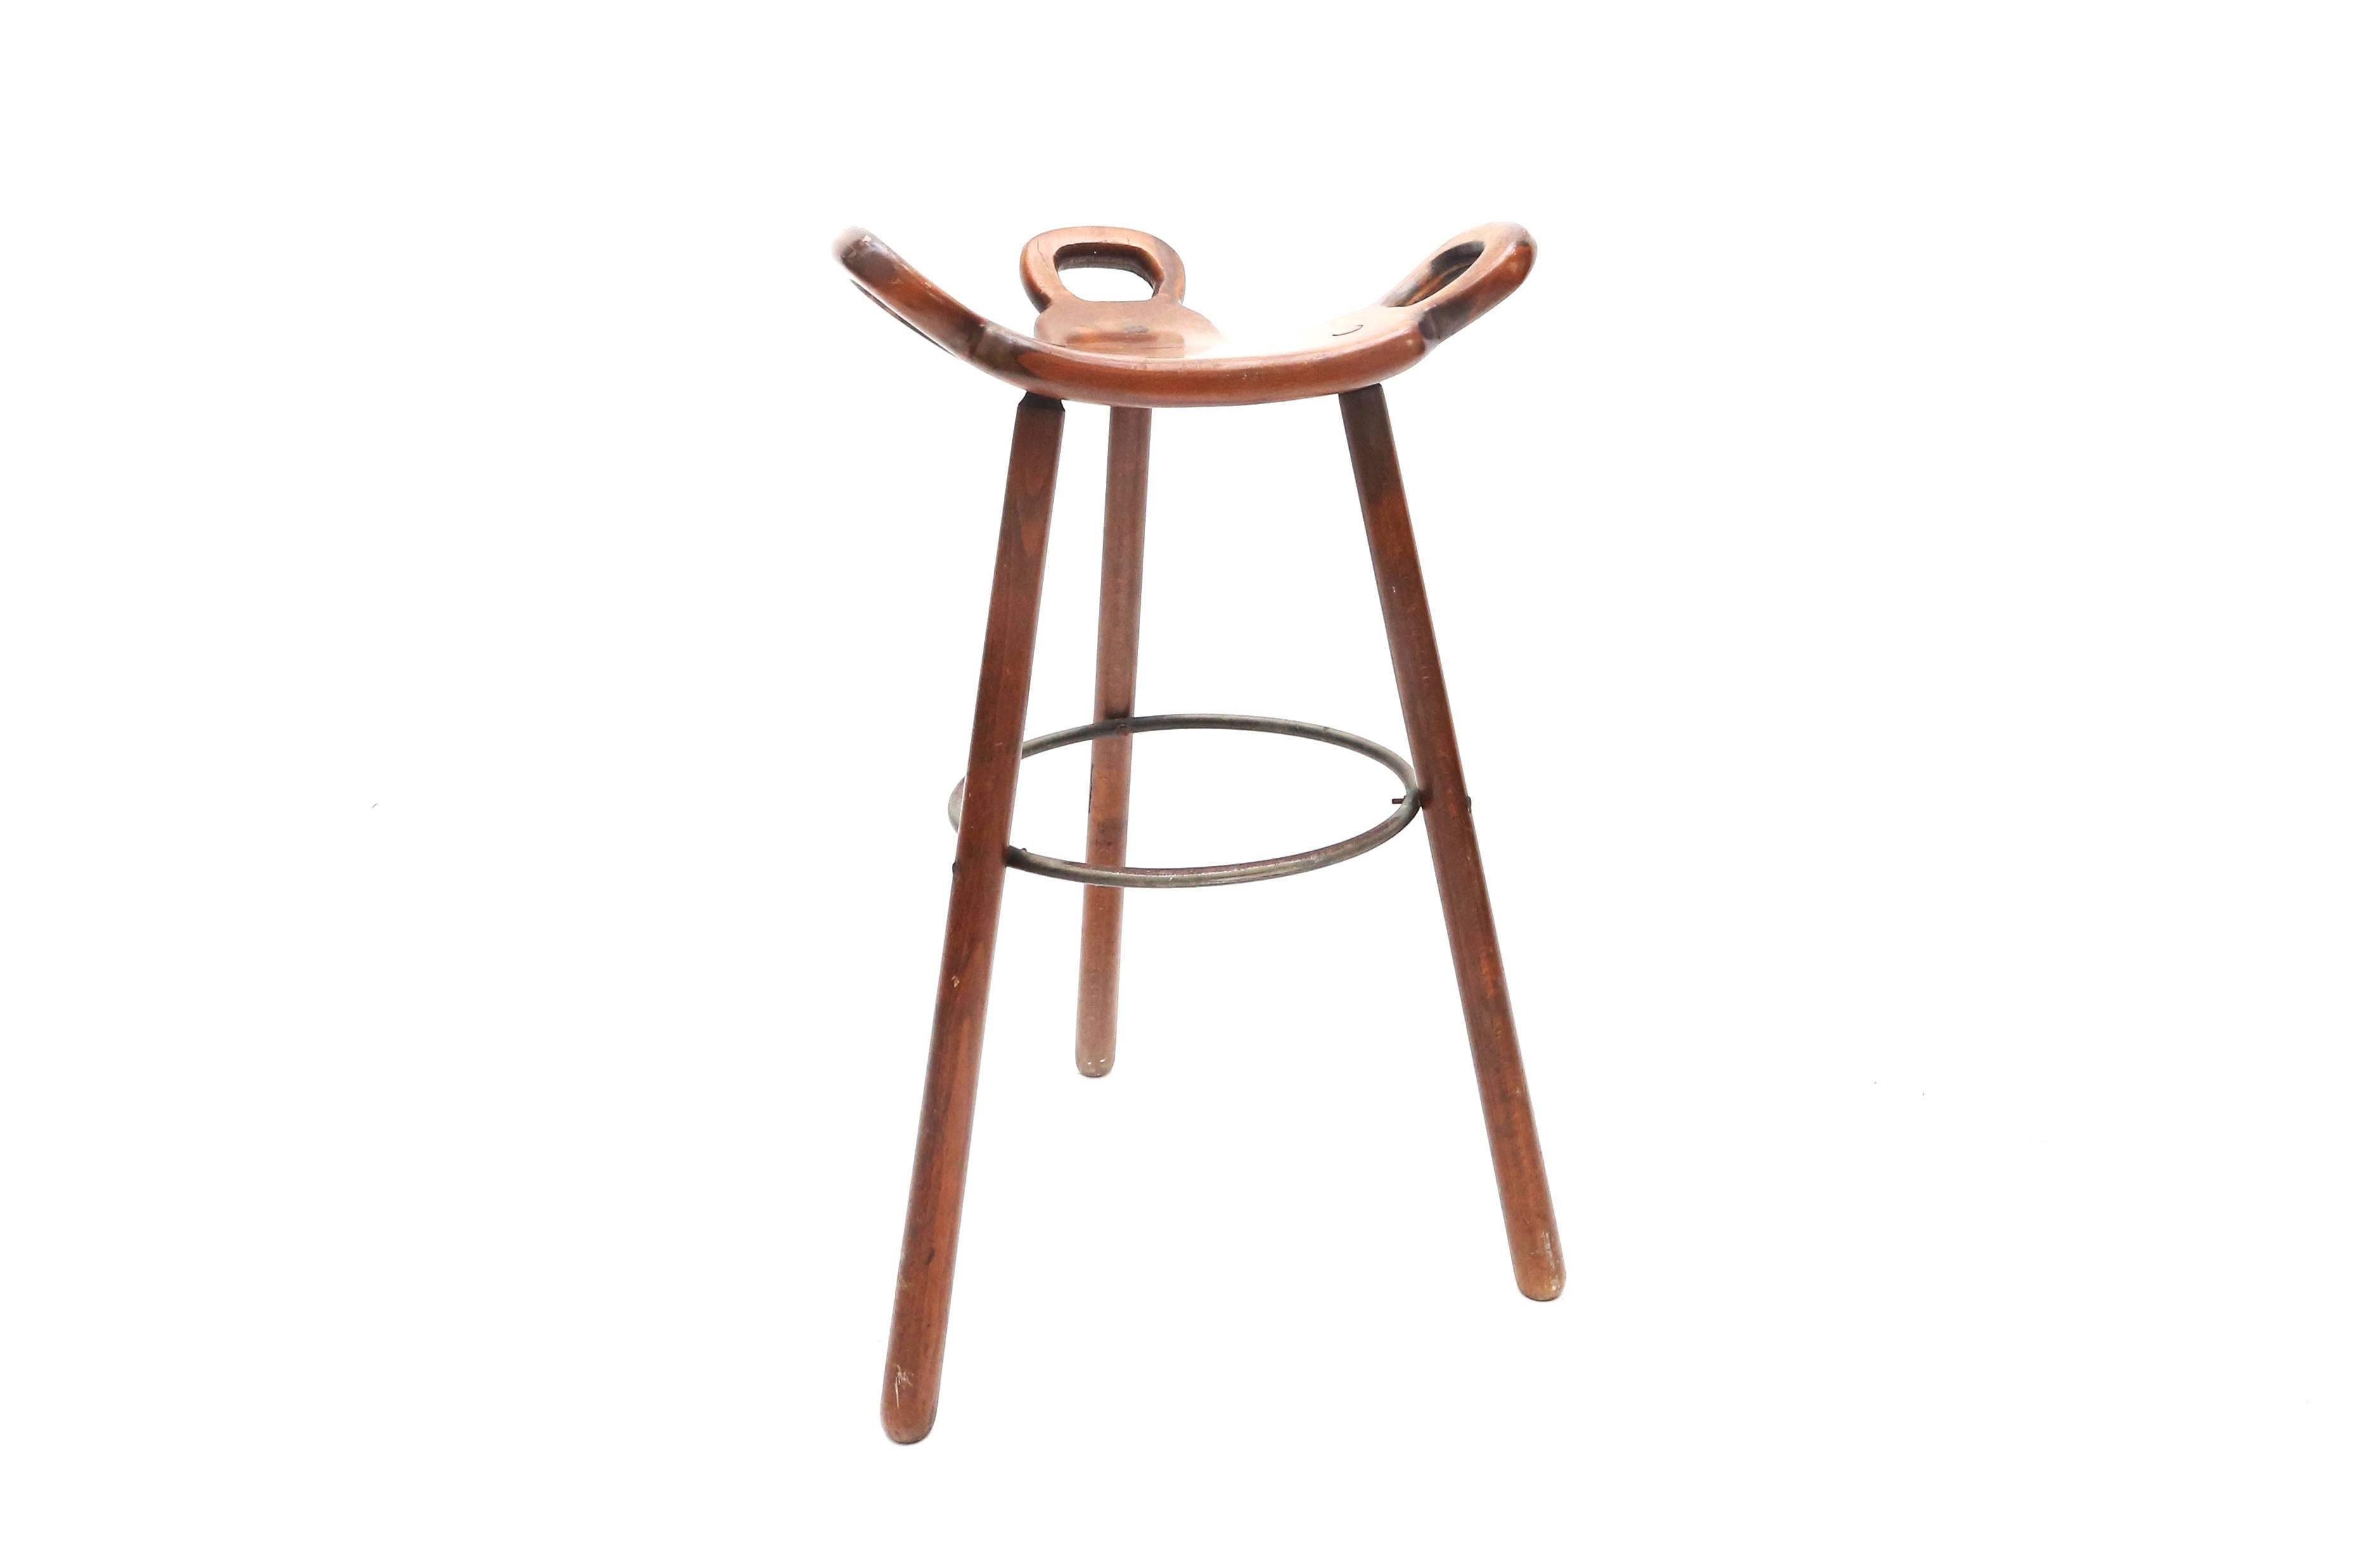 Scandinavian Modern stools, Carl Malmsten

These stools are made of solid beechwood, lacquered steel and beautiful connections to fix the seat. The stools are in original condition with nice patina from age and usage.

Sweden, 1950.